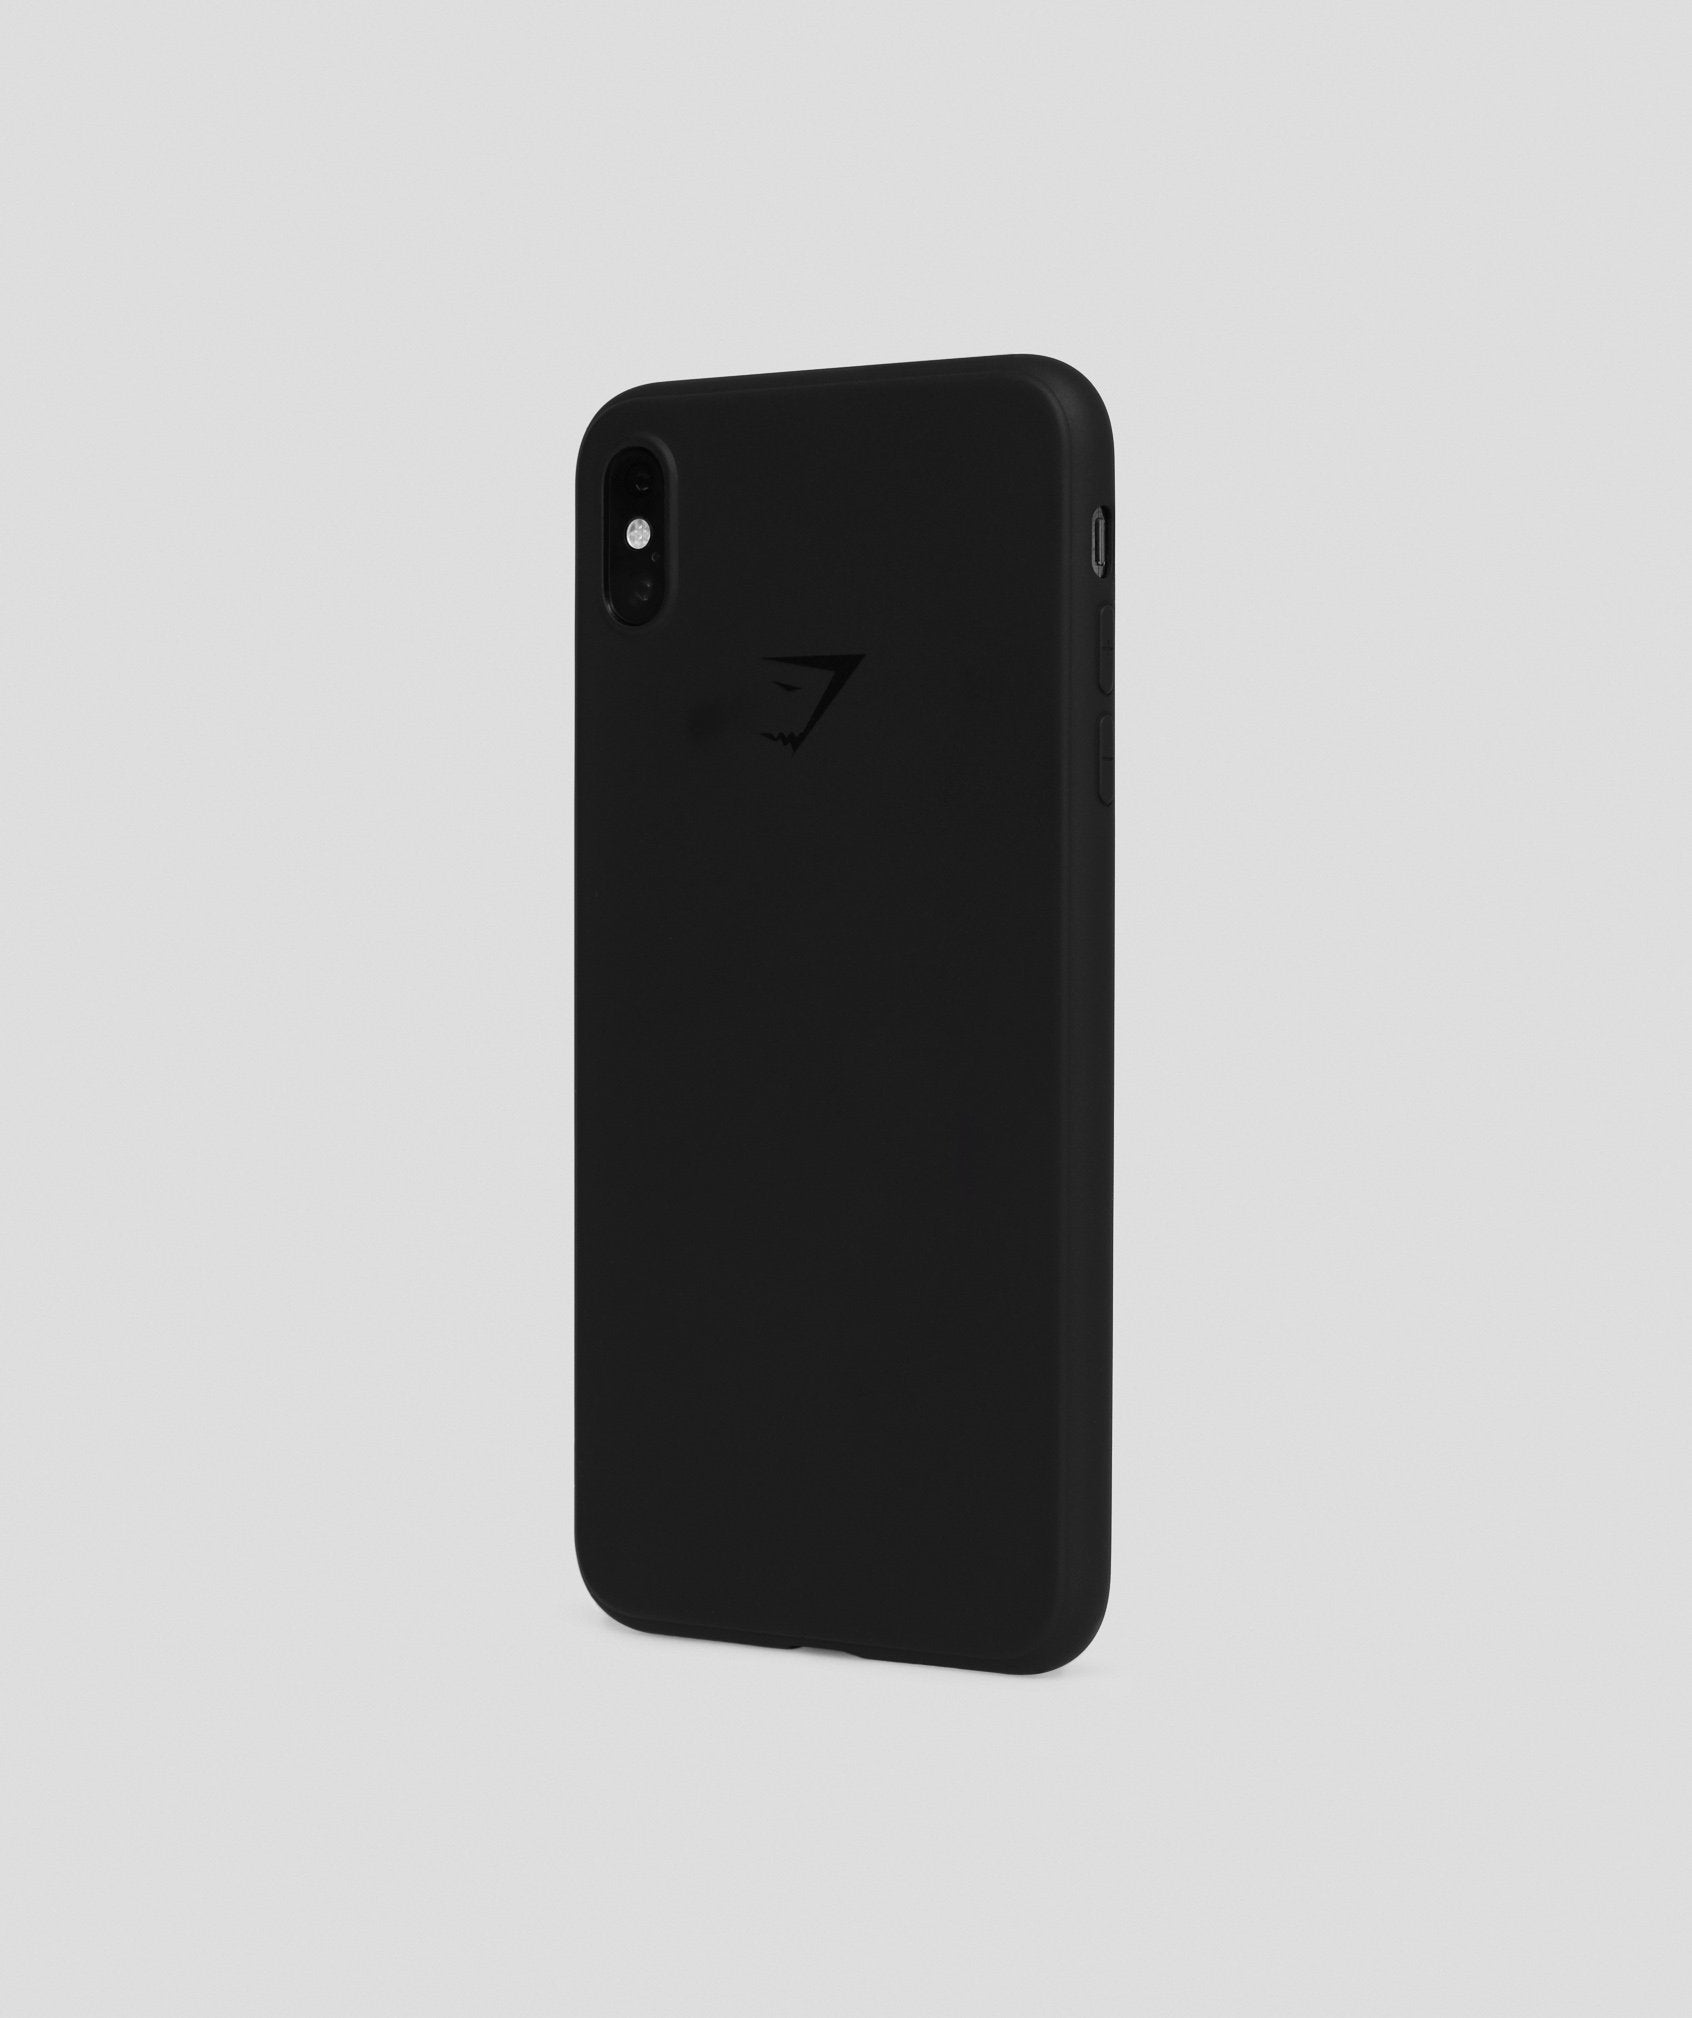 iPhone XS Max Case in Black - view 1